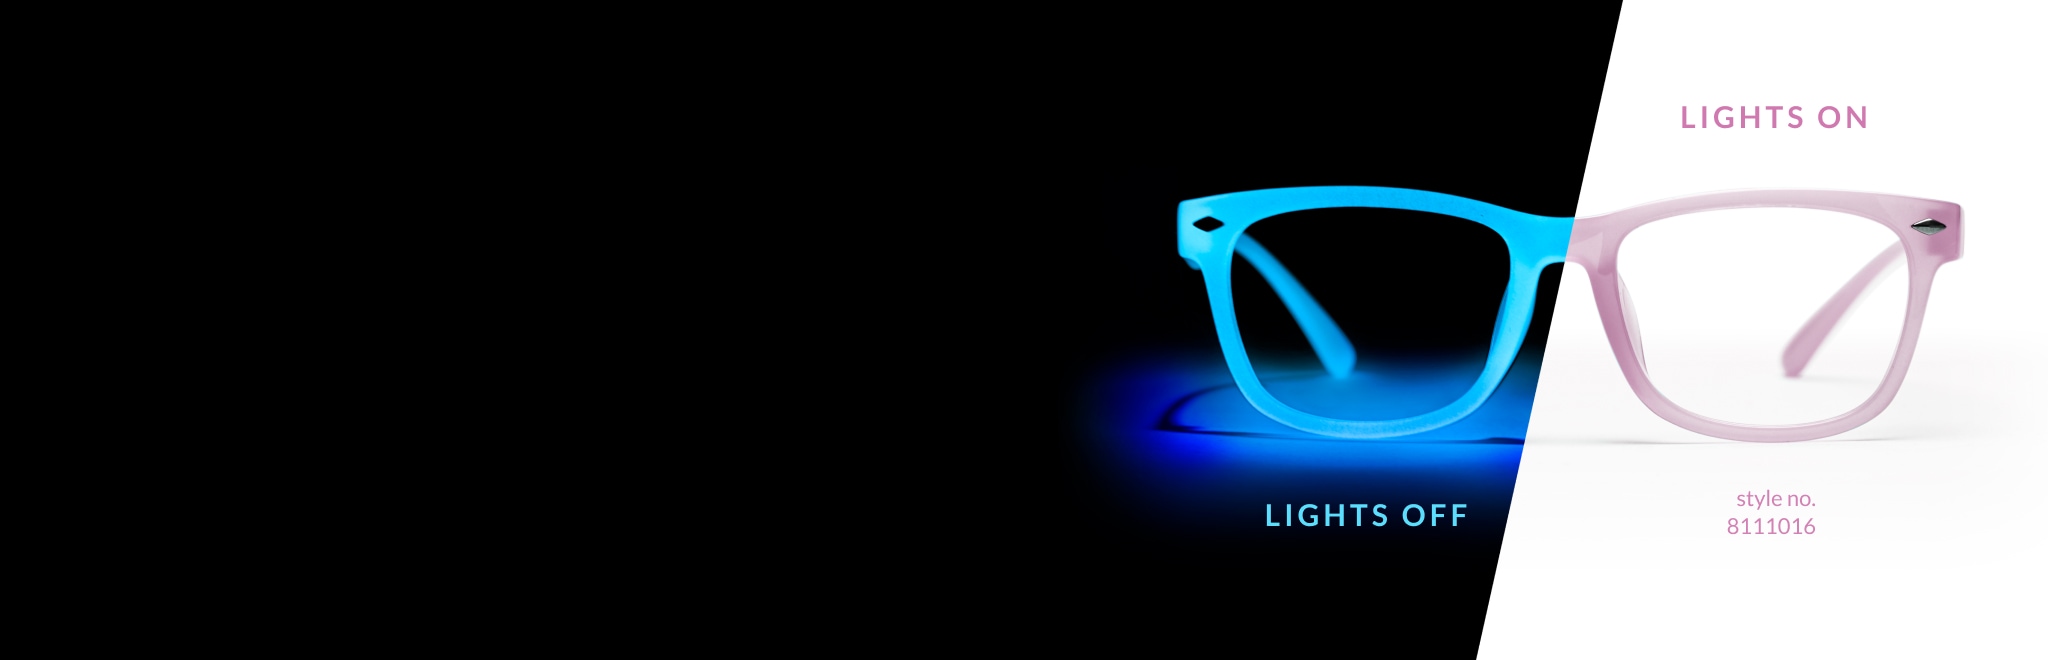 Image of Zenni glow-in-the-dark glasses #8111016, split in half; with one side in the dark glowing bright blue, and the other in the light appearing purple. The dark said says ‘lights off’ and the light side says ‘lights on’.